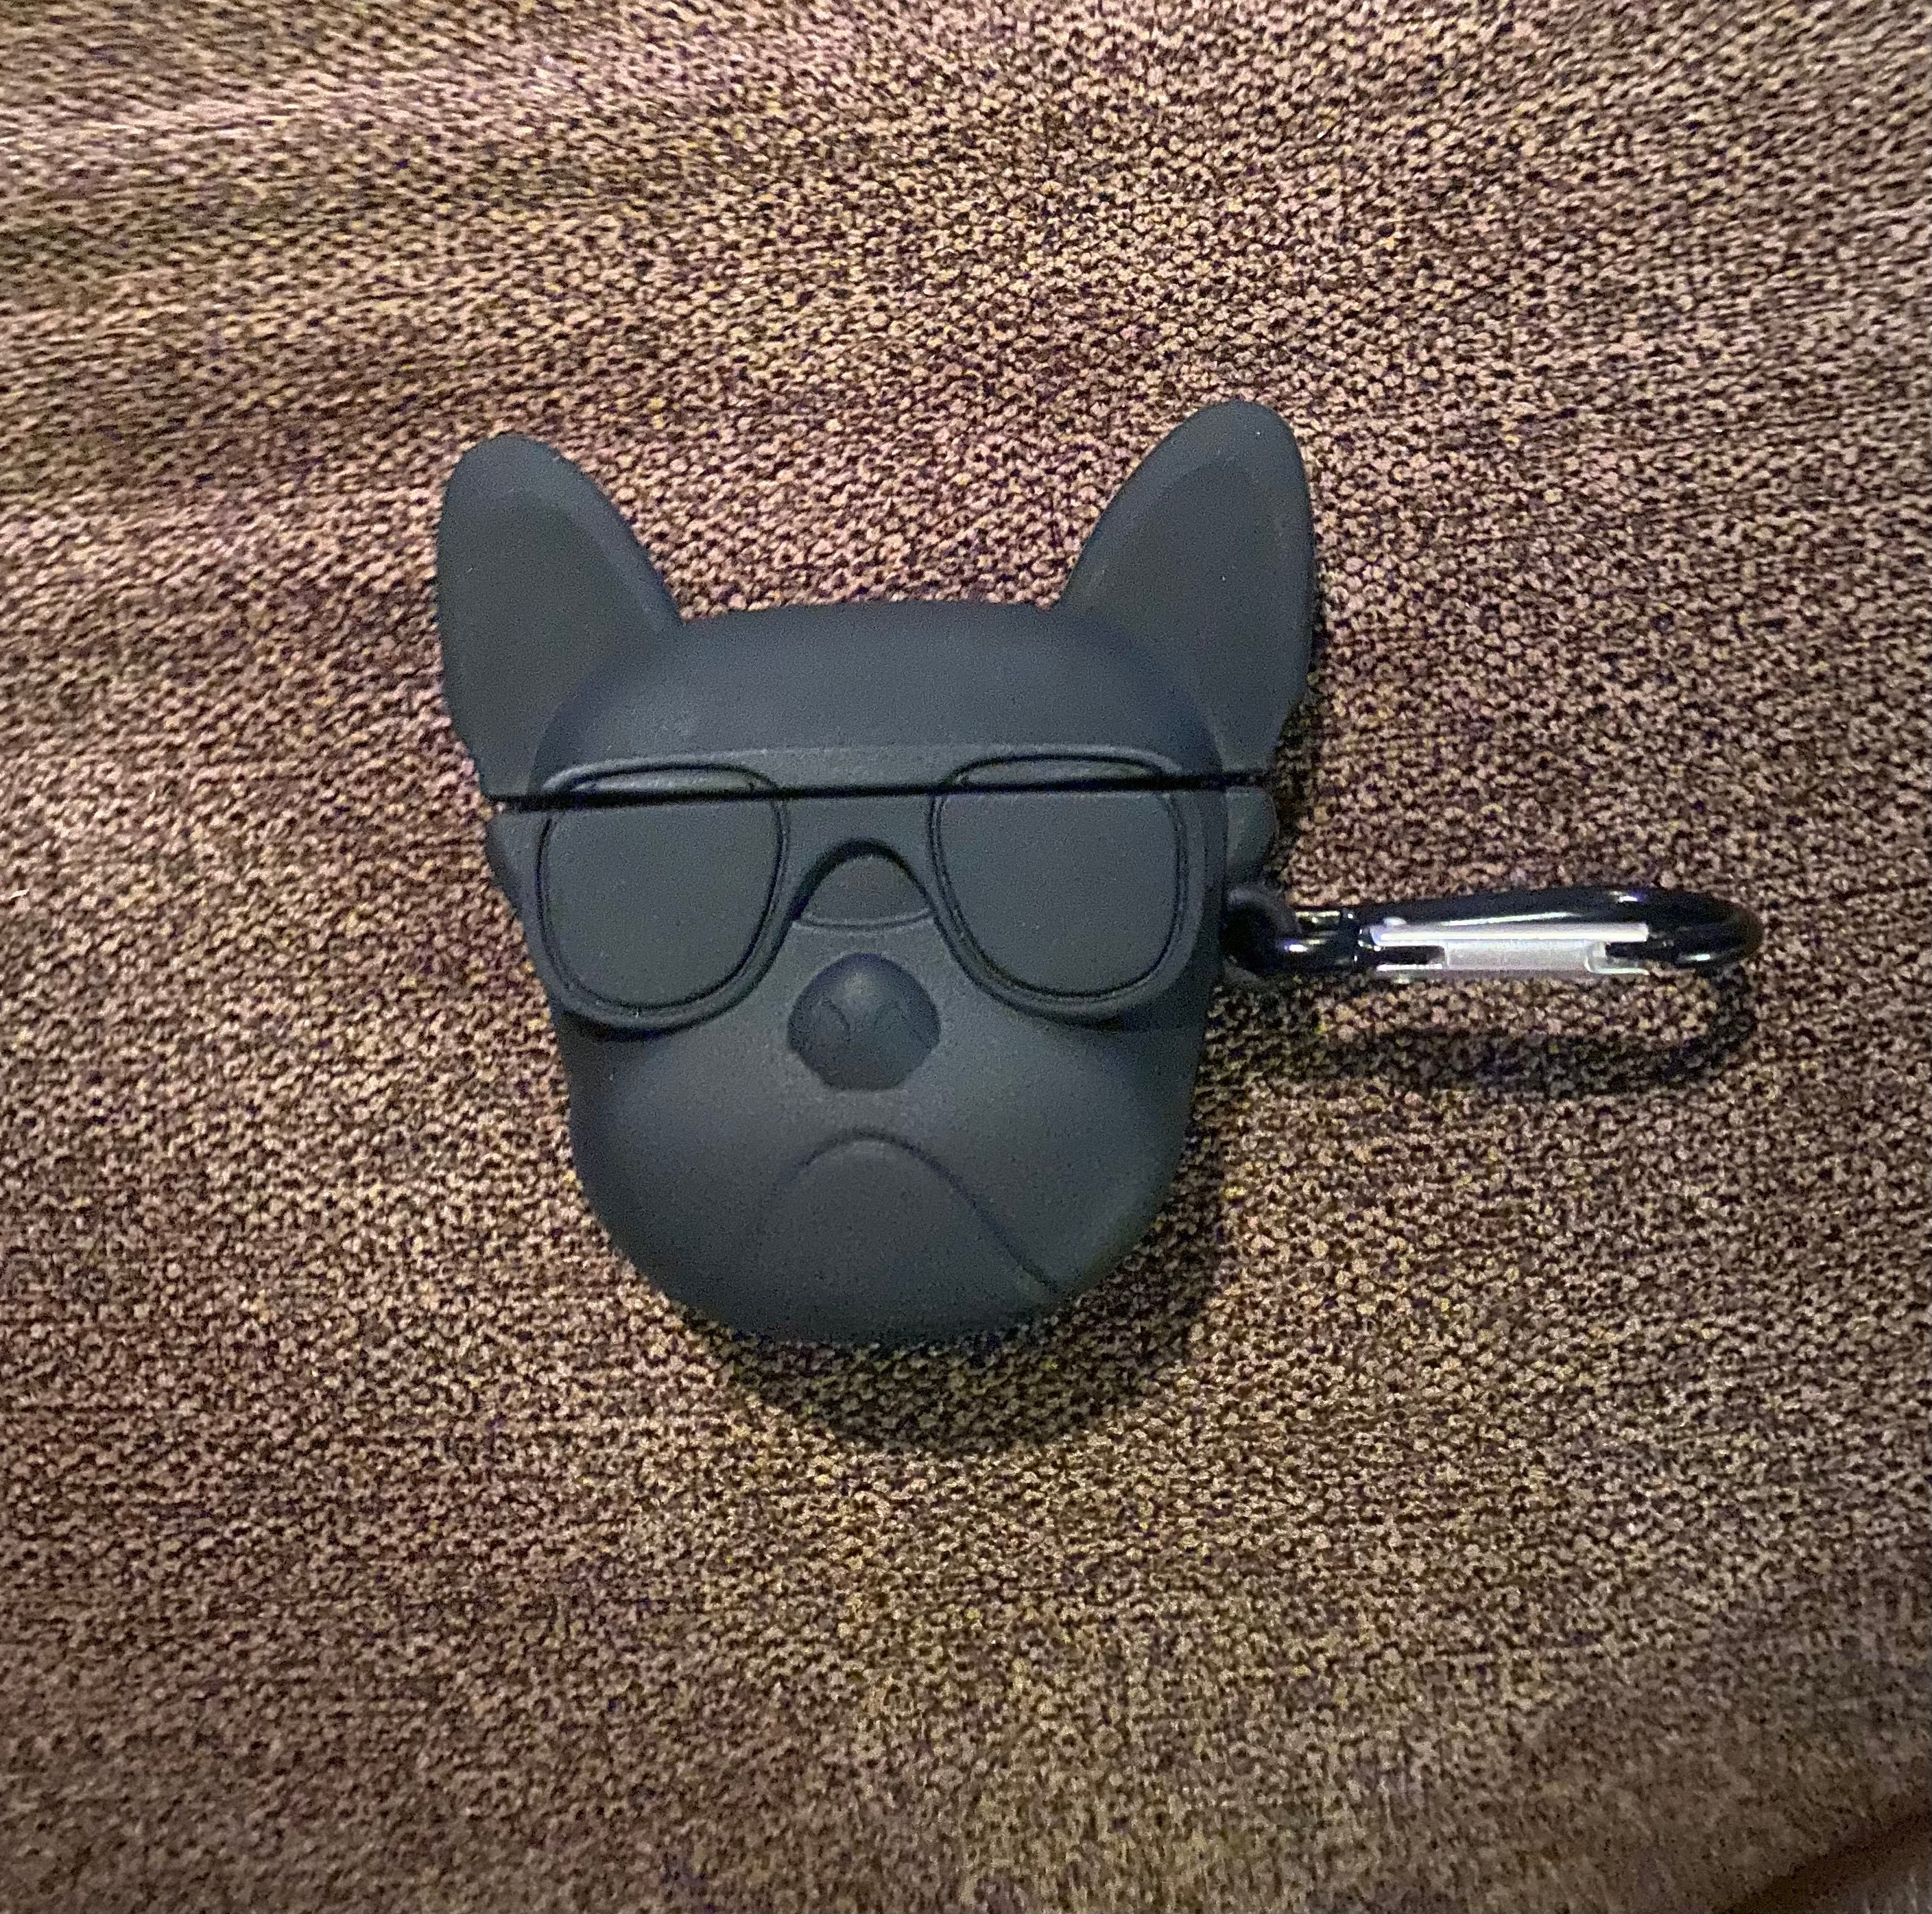 Furry Dog Earbud Case Cover - Compatible with Apple AirPods pro®